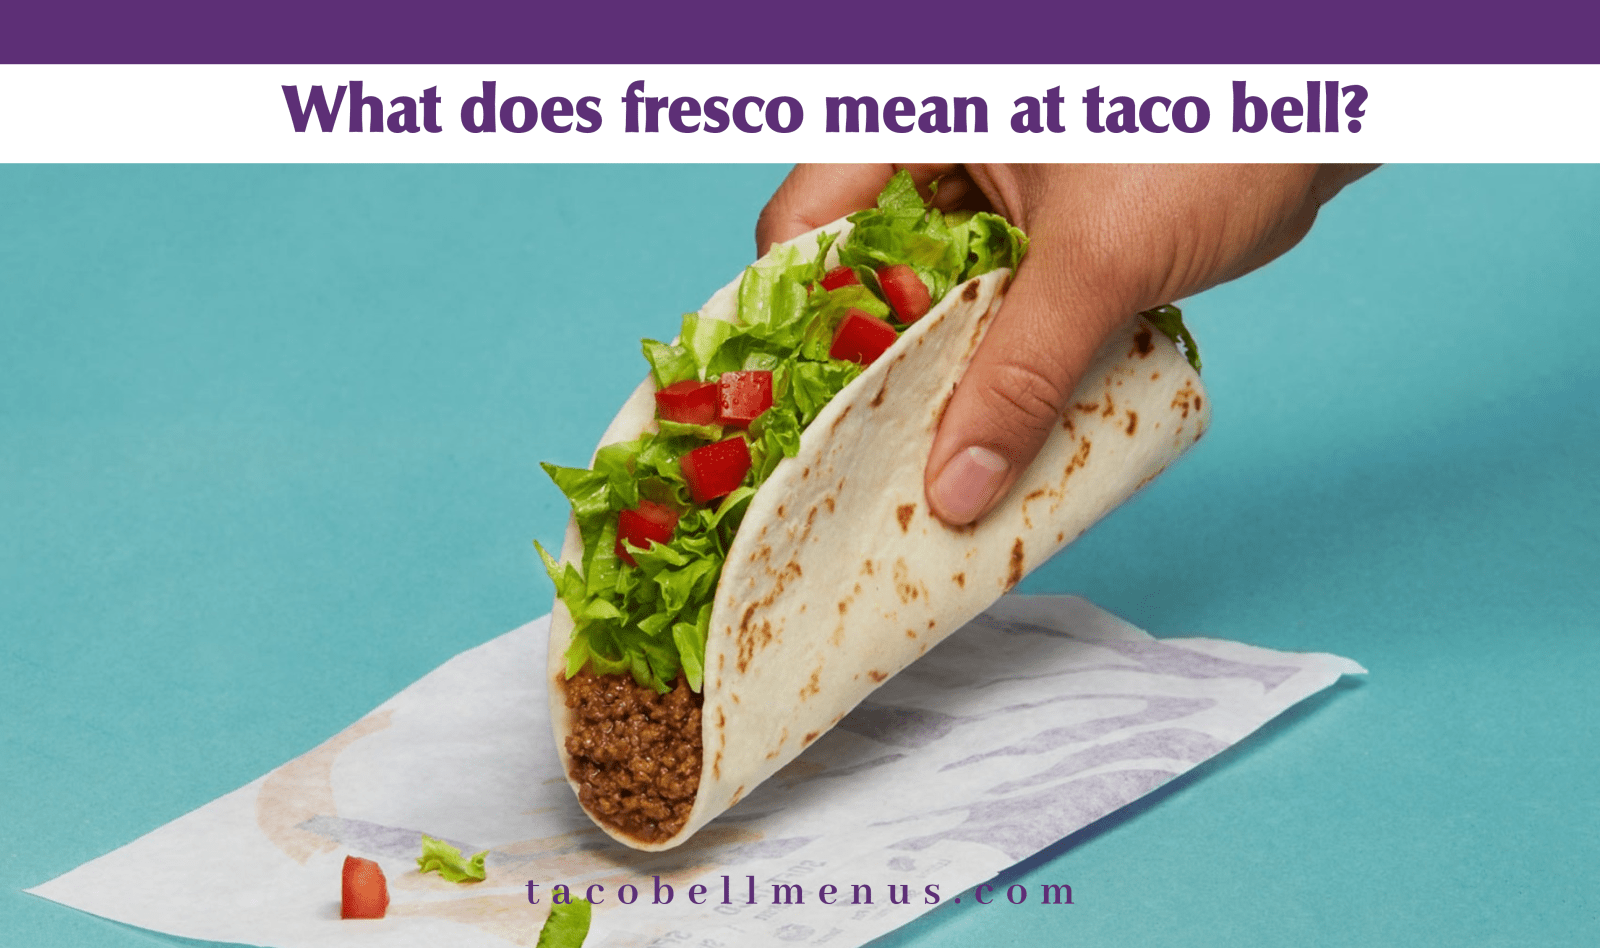 What does fresco mean at taco bell?